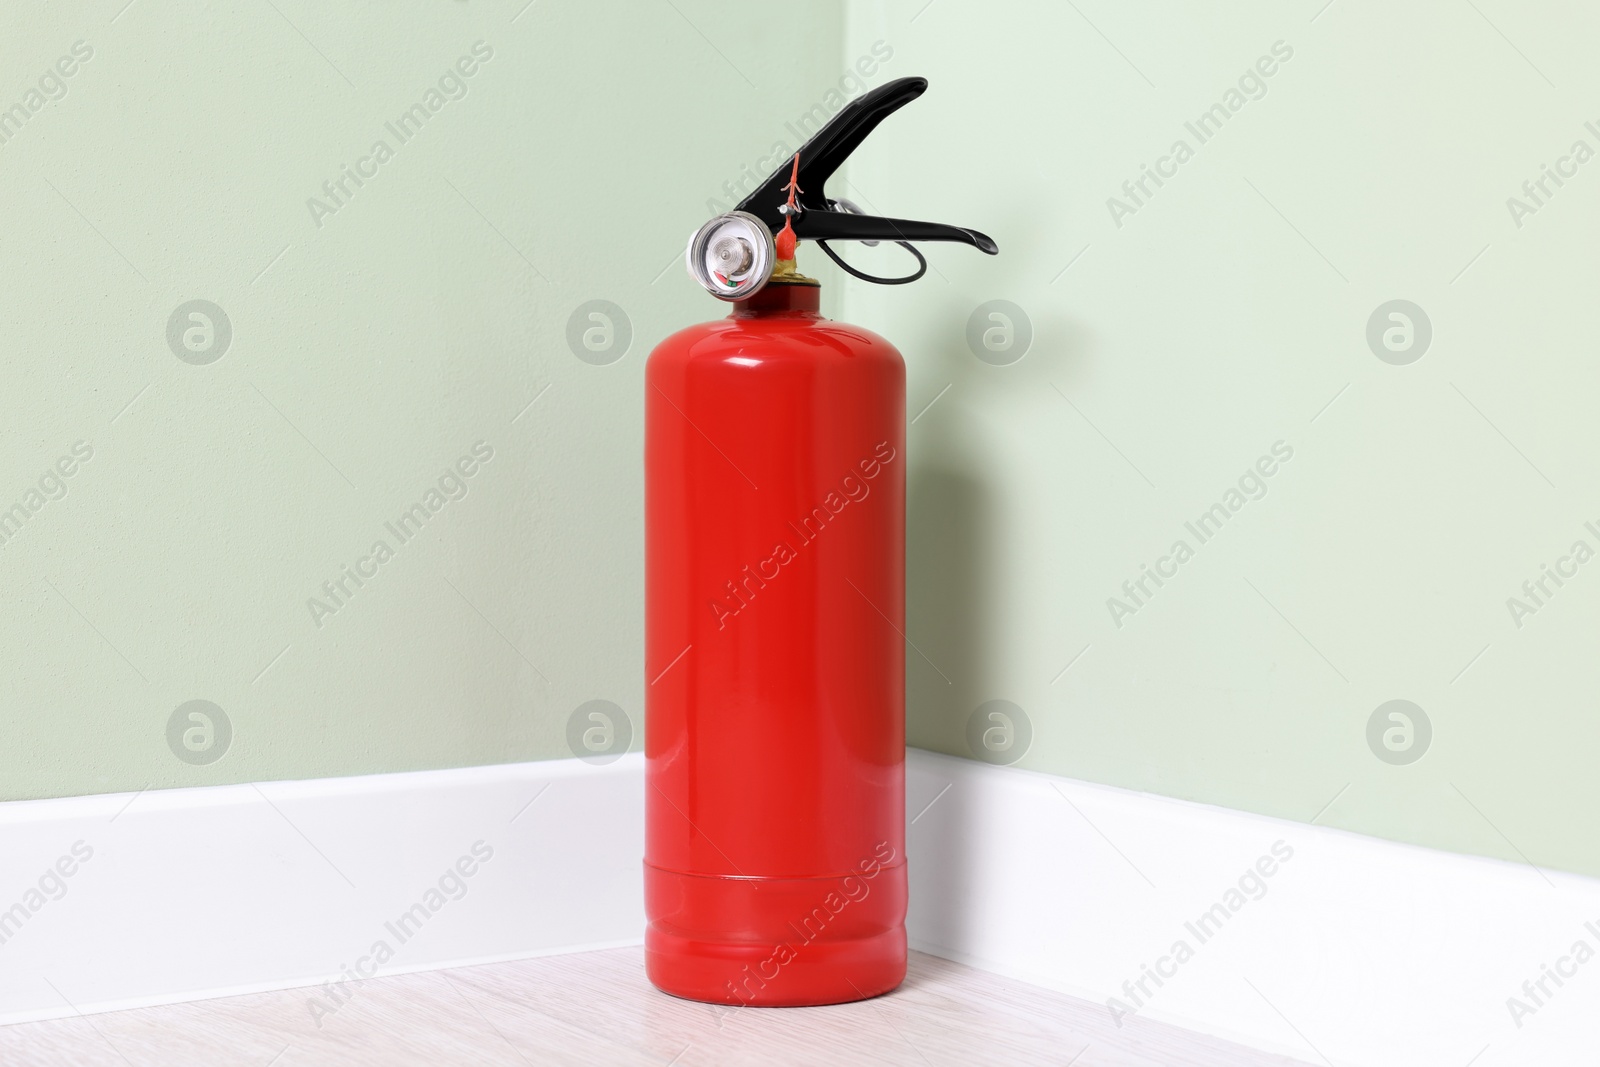 Photo of Red fire extinguisher near light green wall